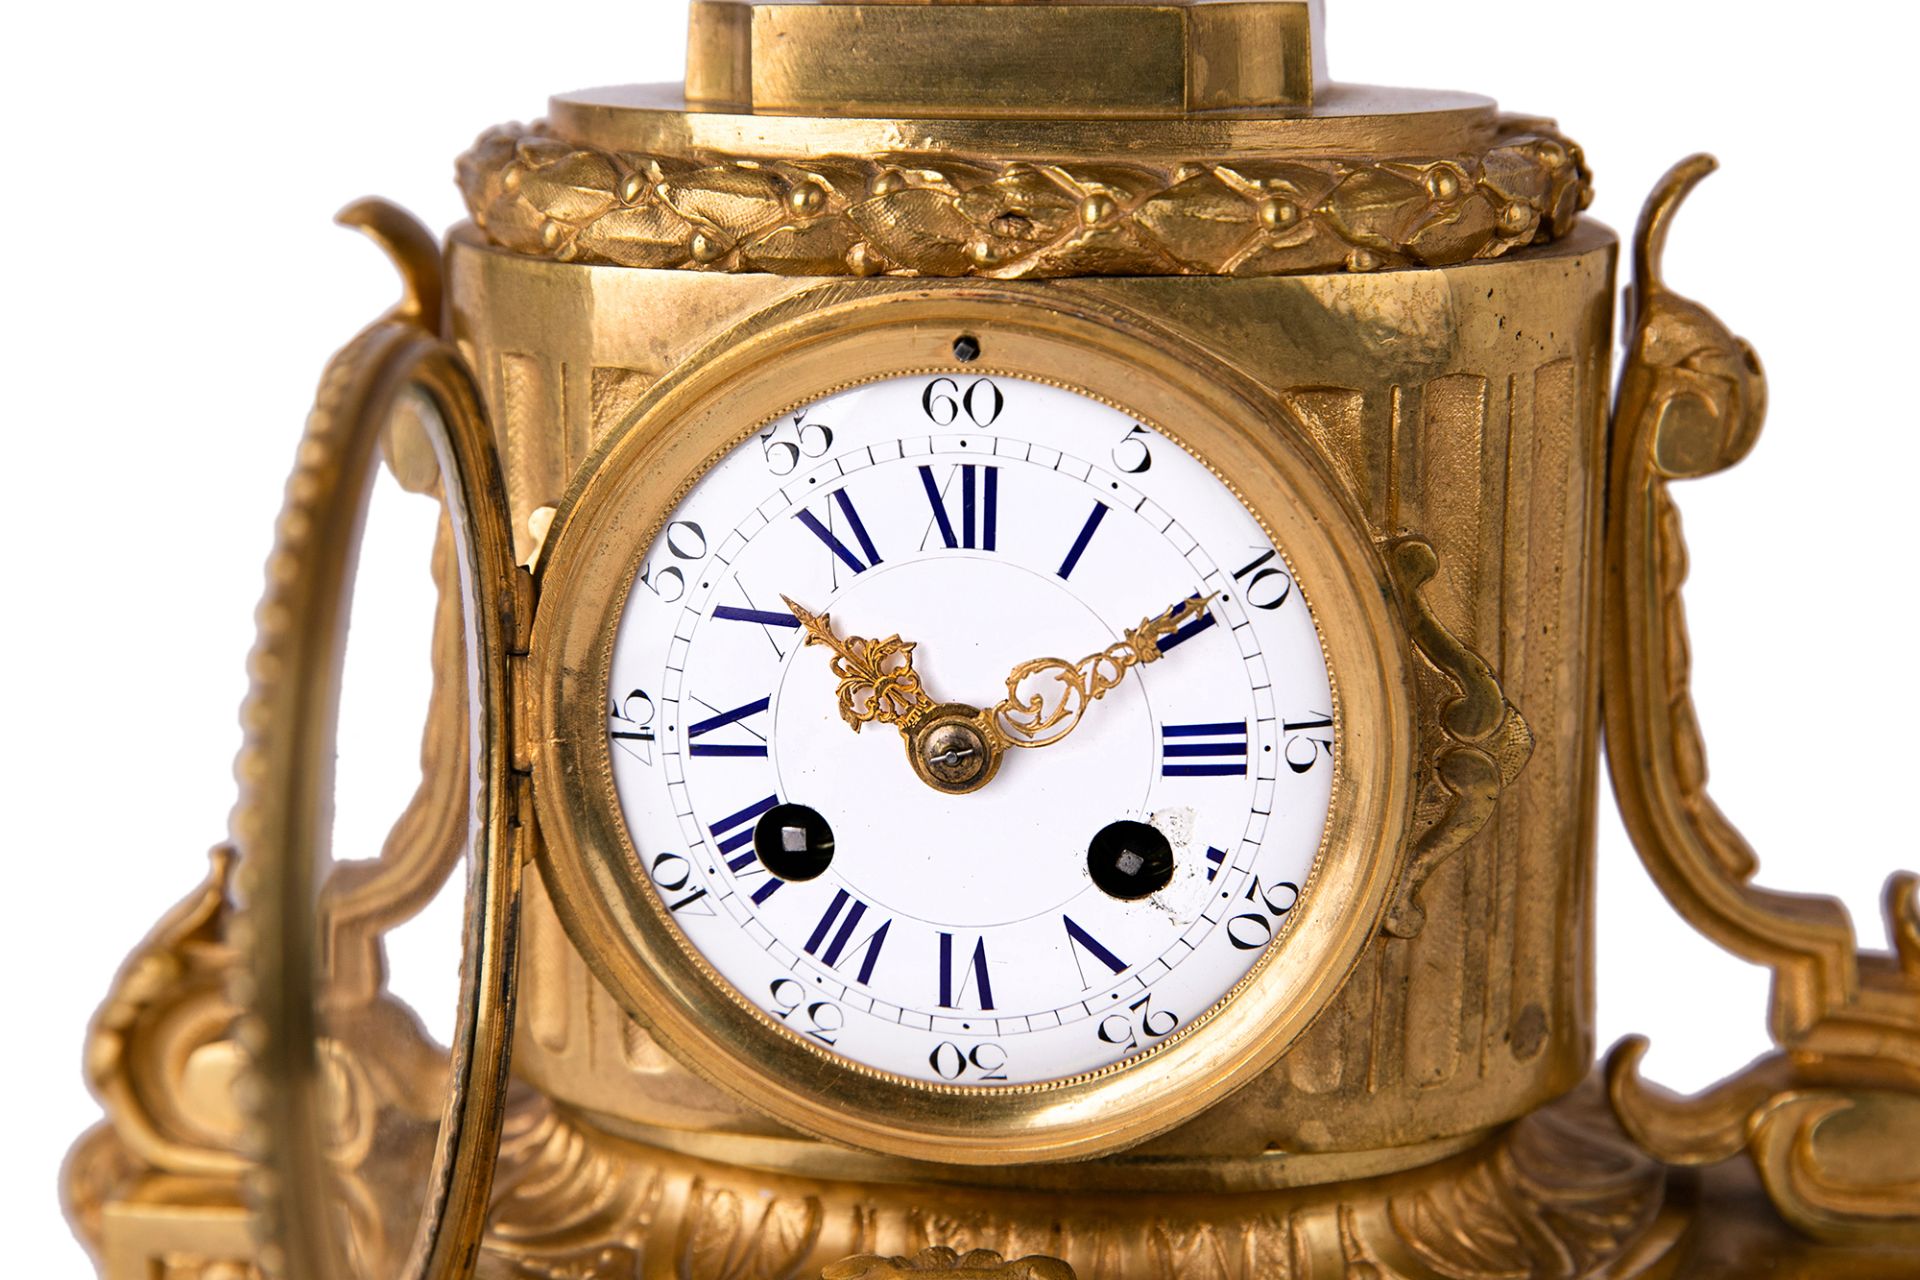 A French gilt-bronze mantel clock, mid-19th century, the case with truncated column flanked by sc... - Image 2 of 4